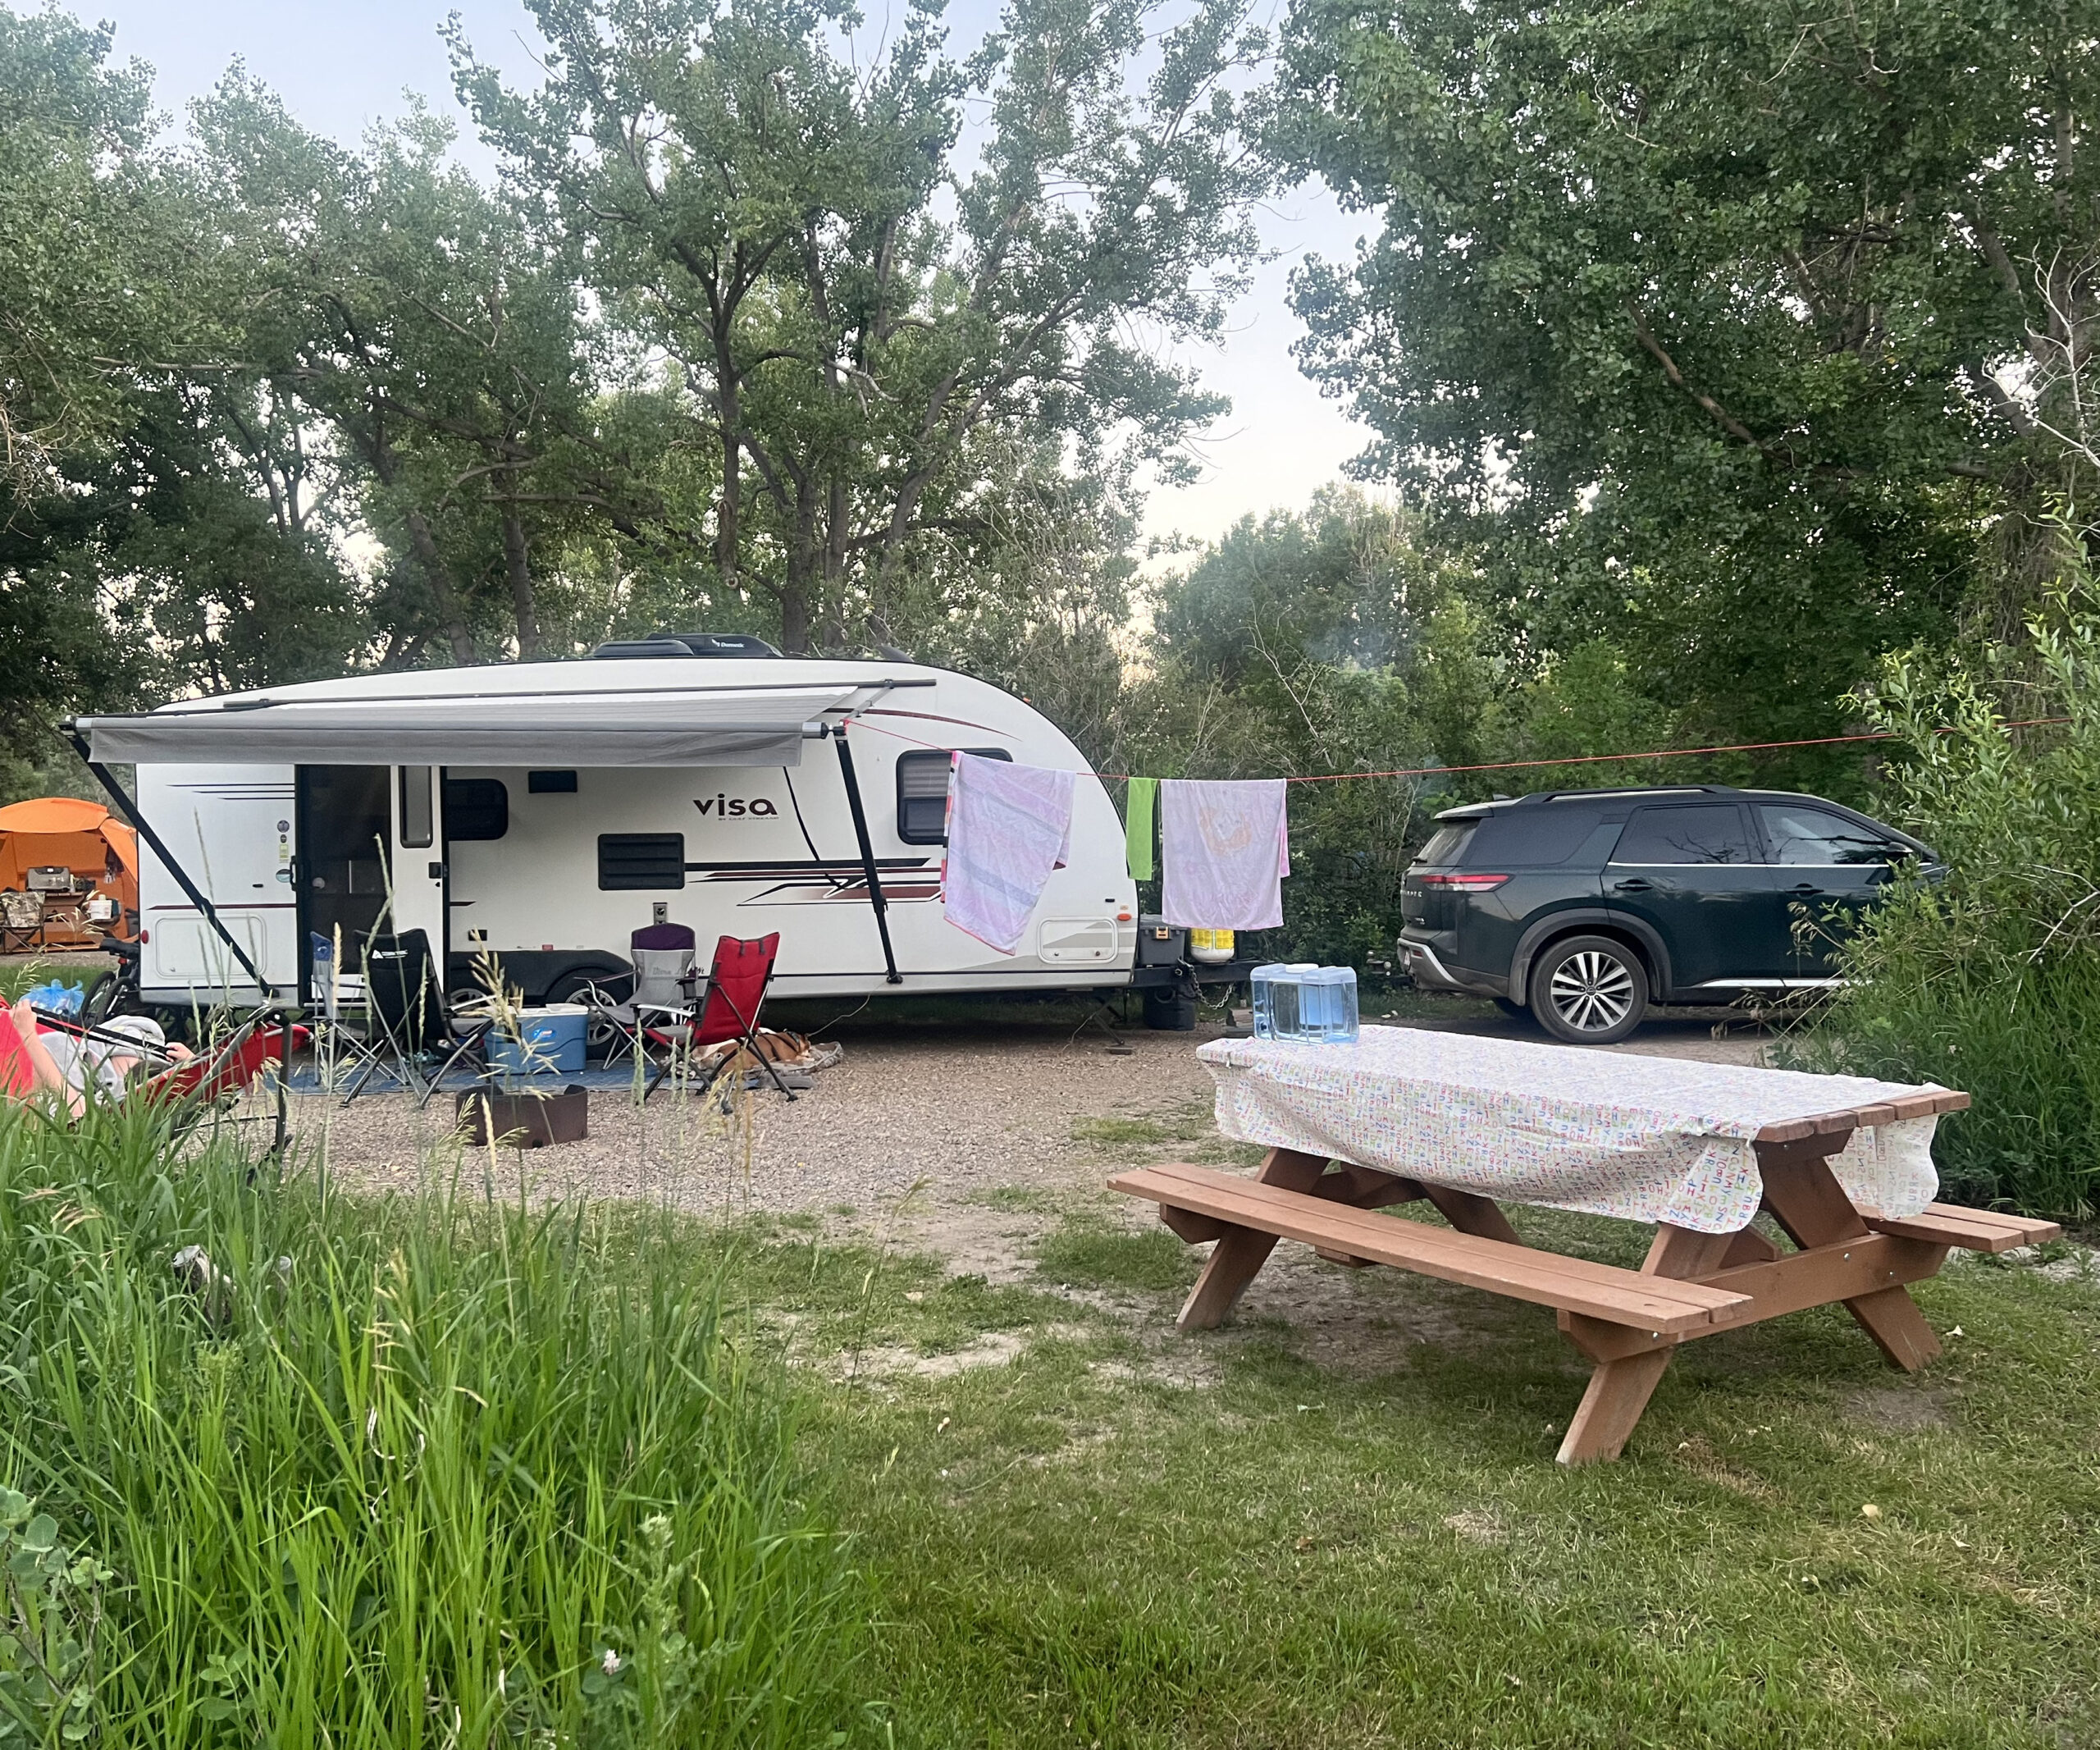 Writing-On-Stone Provincial Park Campground